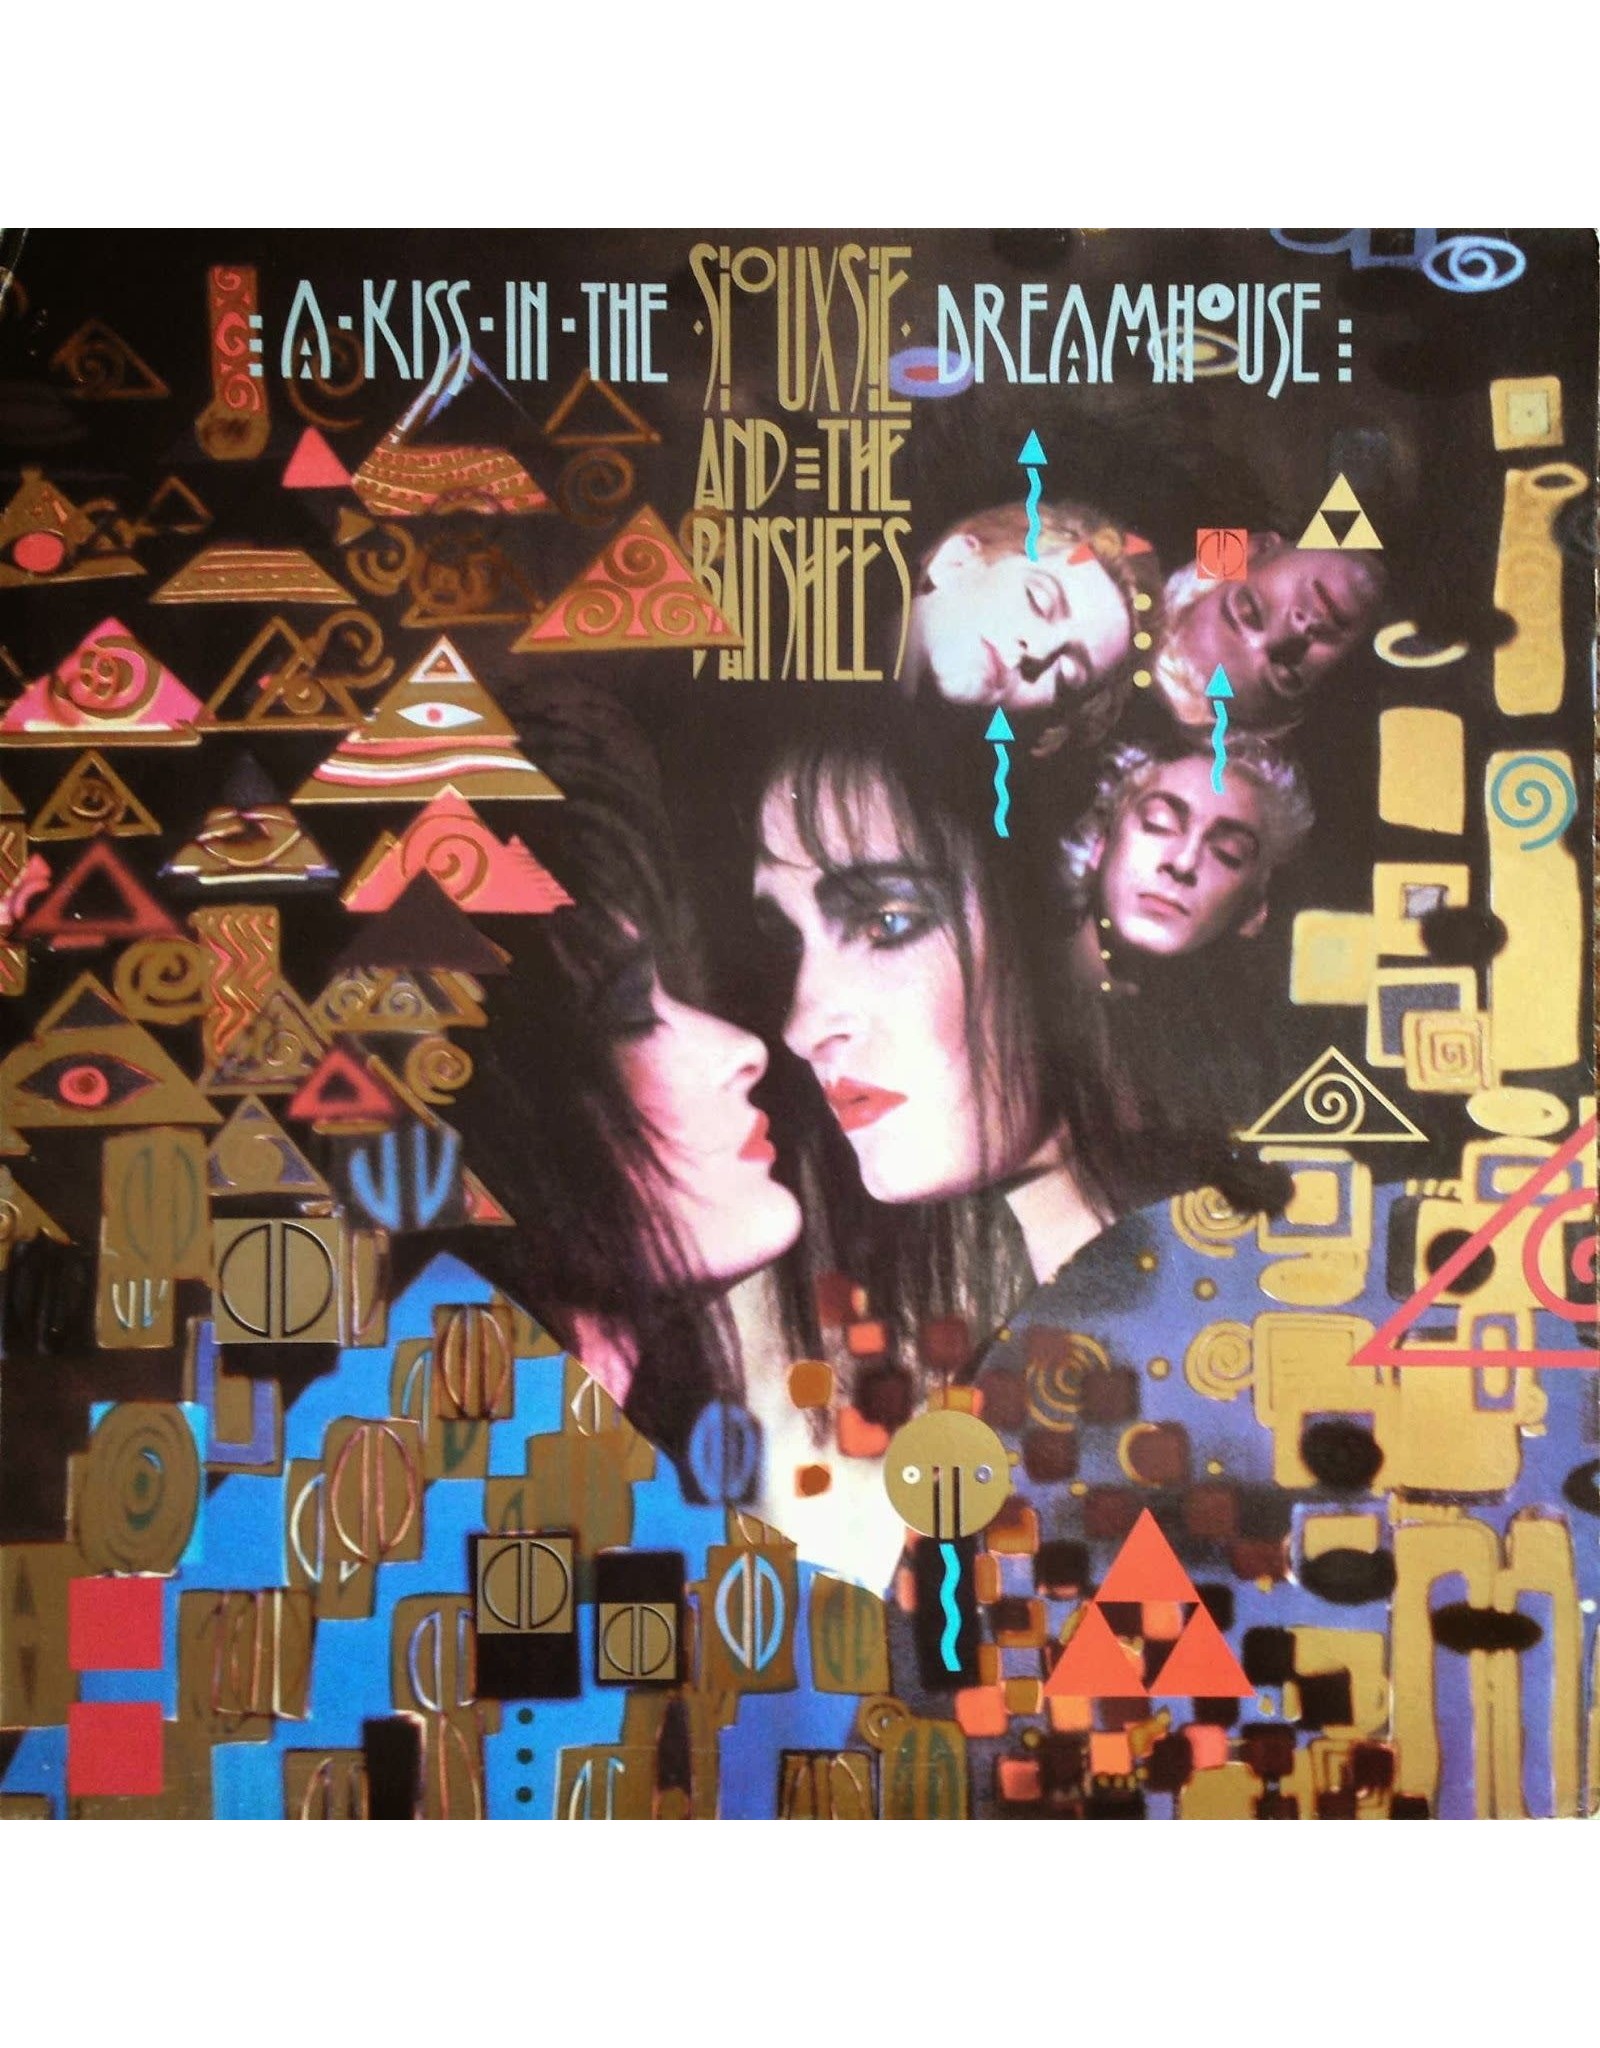 Siouxsie &The Banshees - A Kiss In The Dreamhouse (Half-Speed Master)